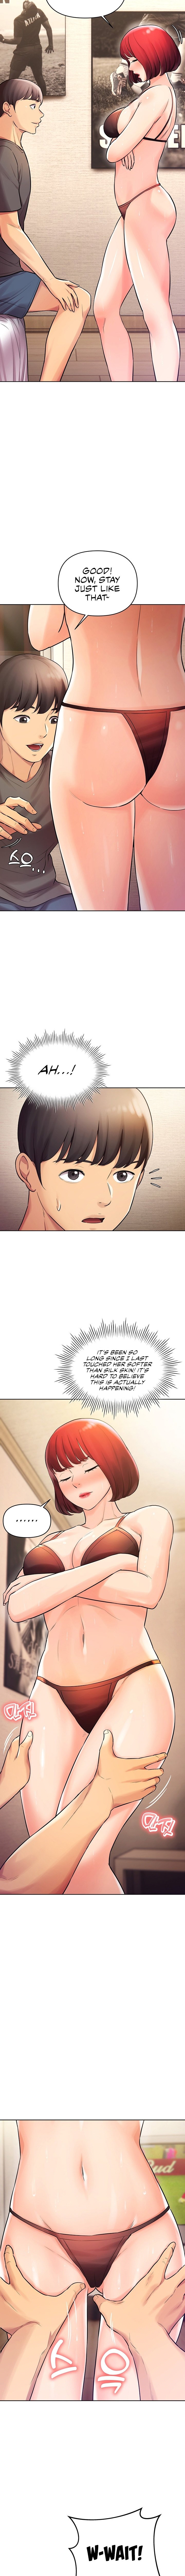 the-girls-i-couldnt-date-before-chap-23-2